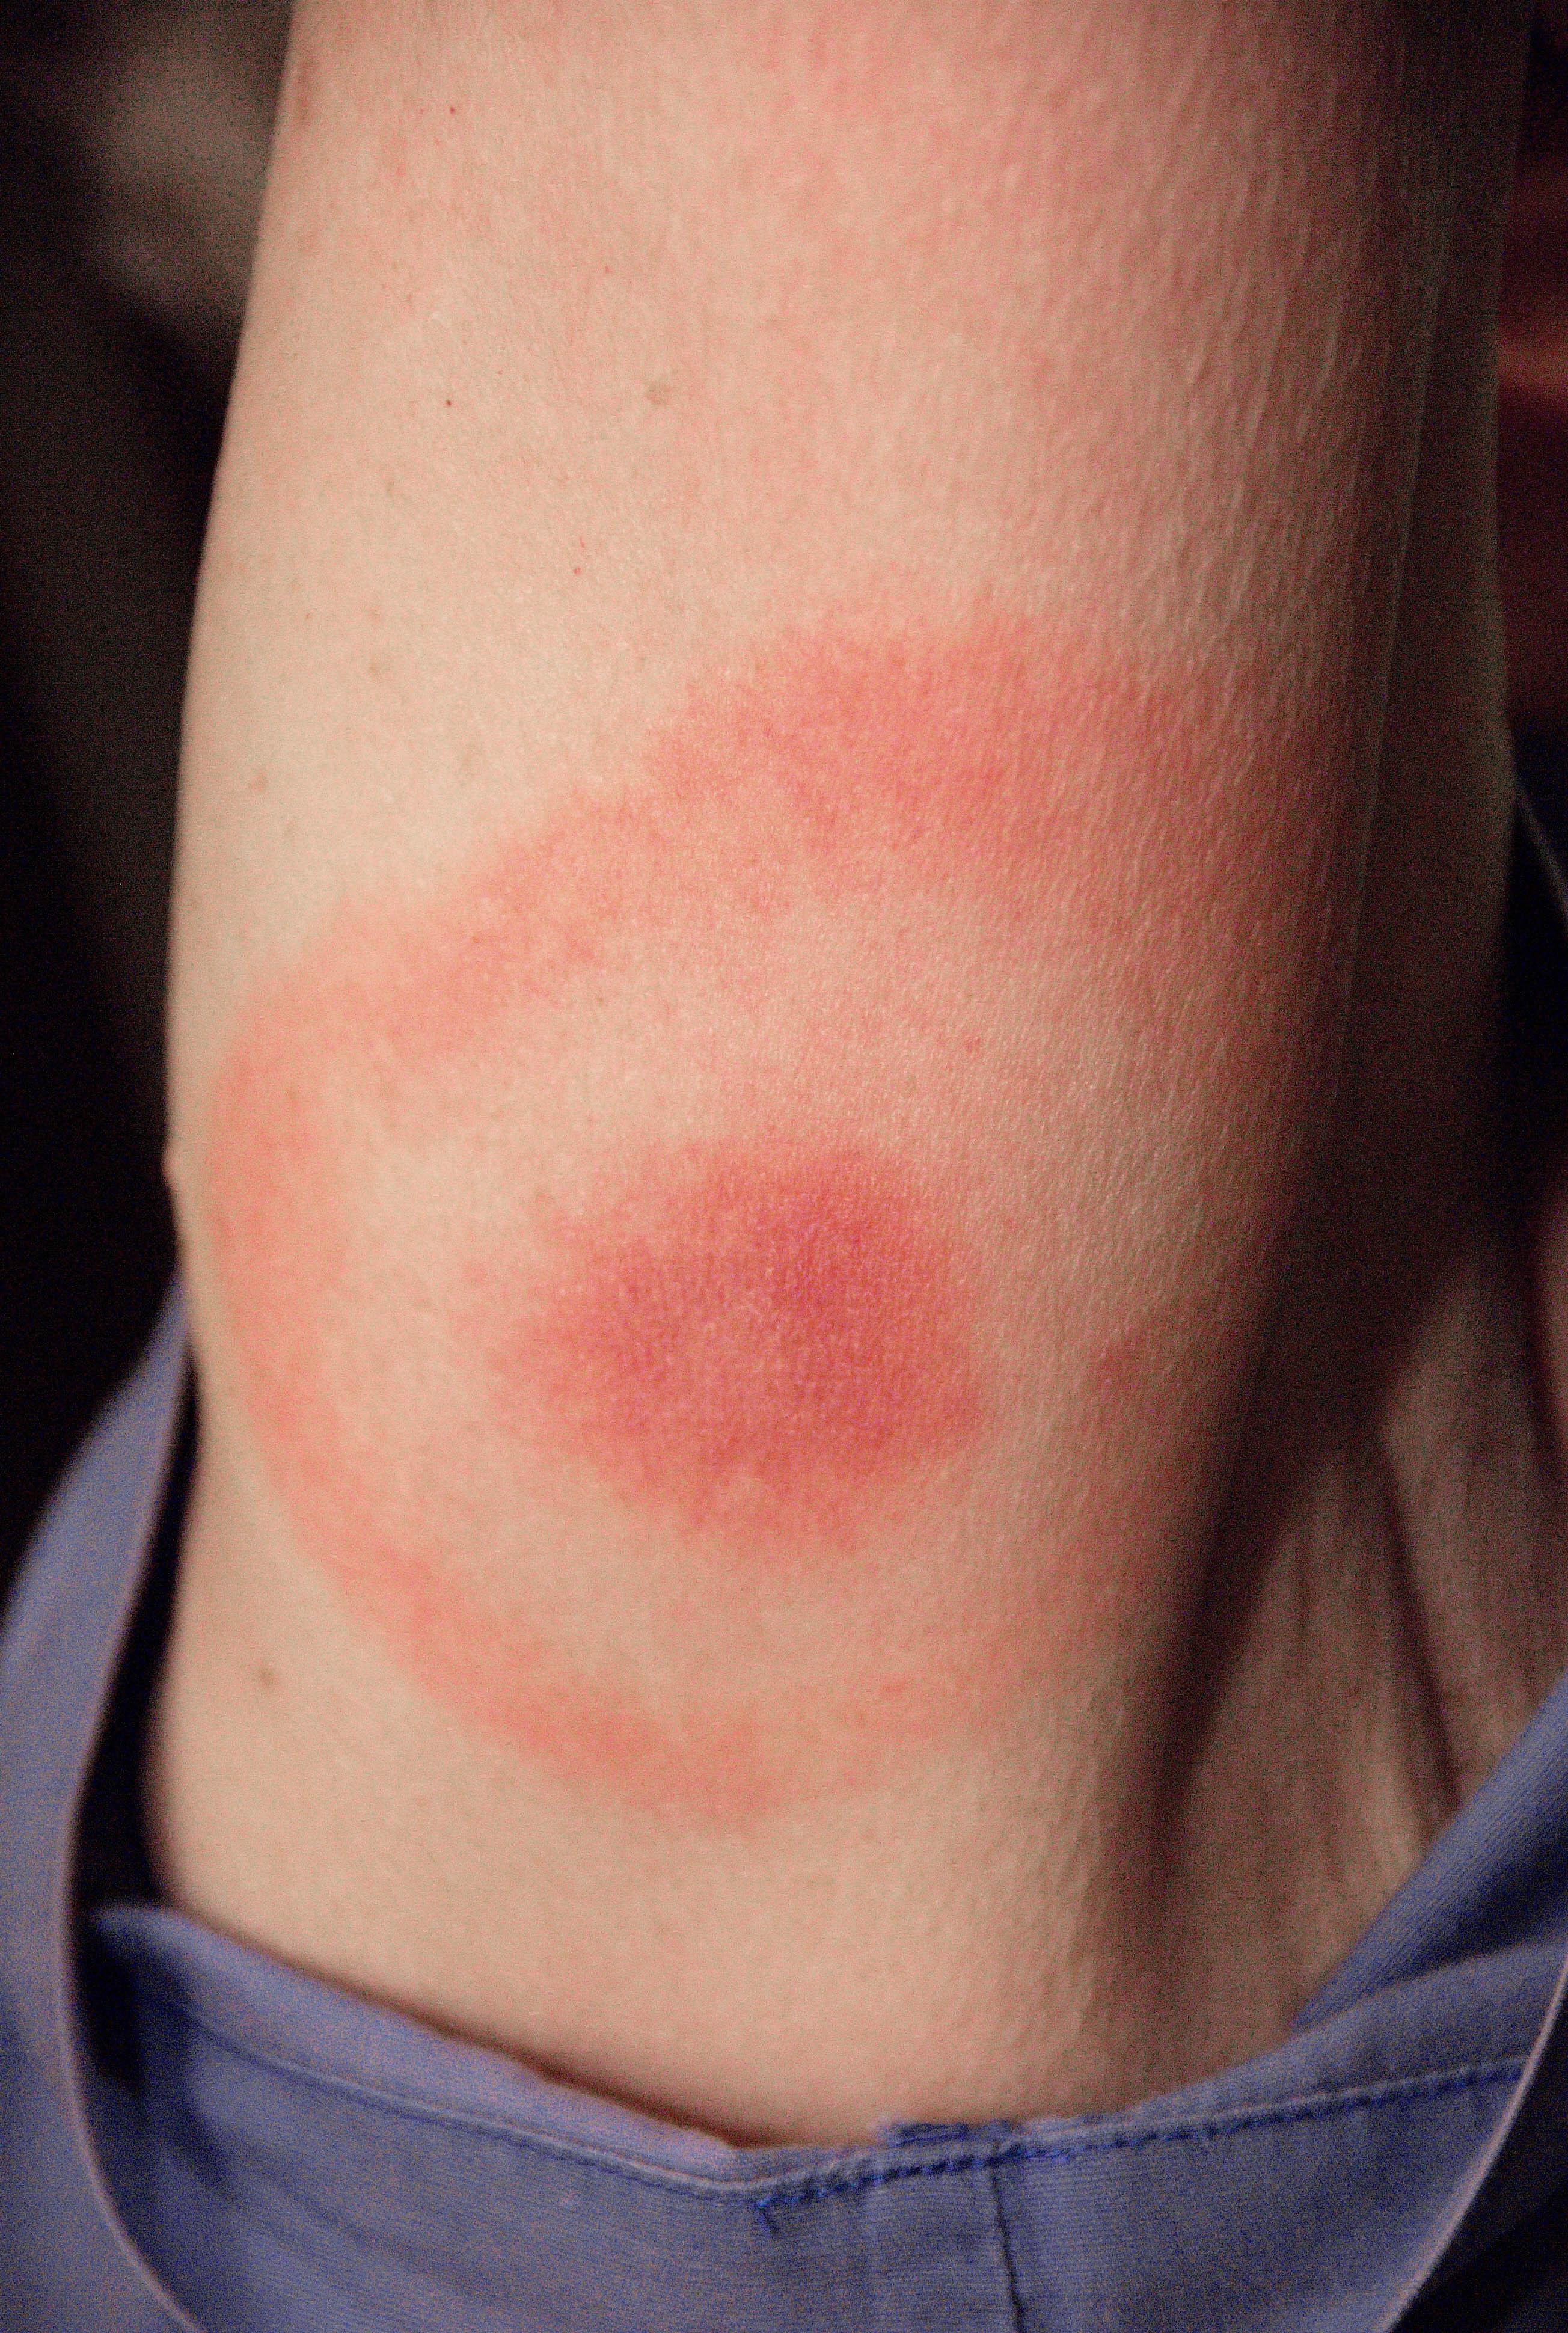 Pictured is the characteristic bull’s-eye rash, which manifested at the site of a tick bite on a woman in Maryland. (James Gathany / CDC)